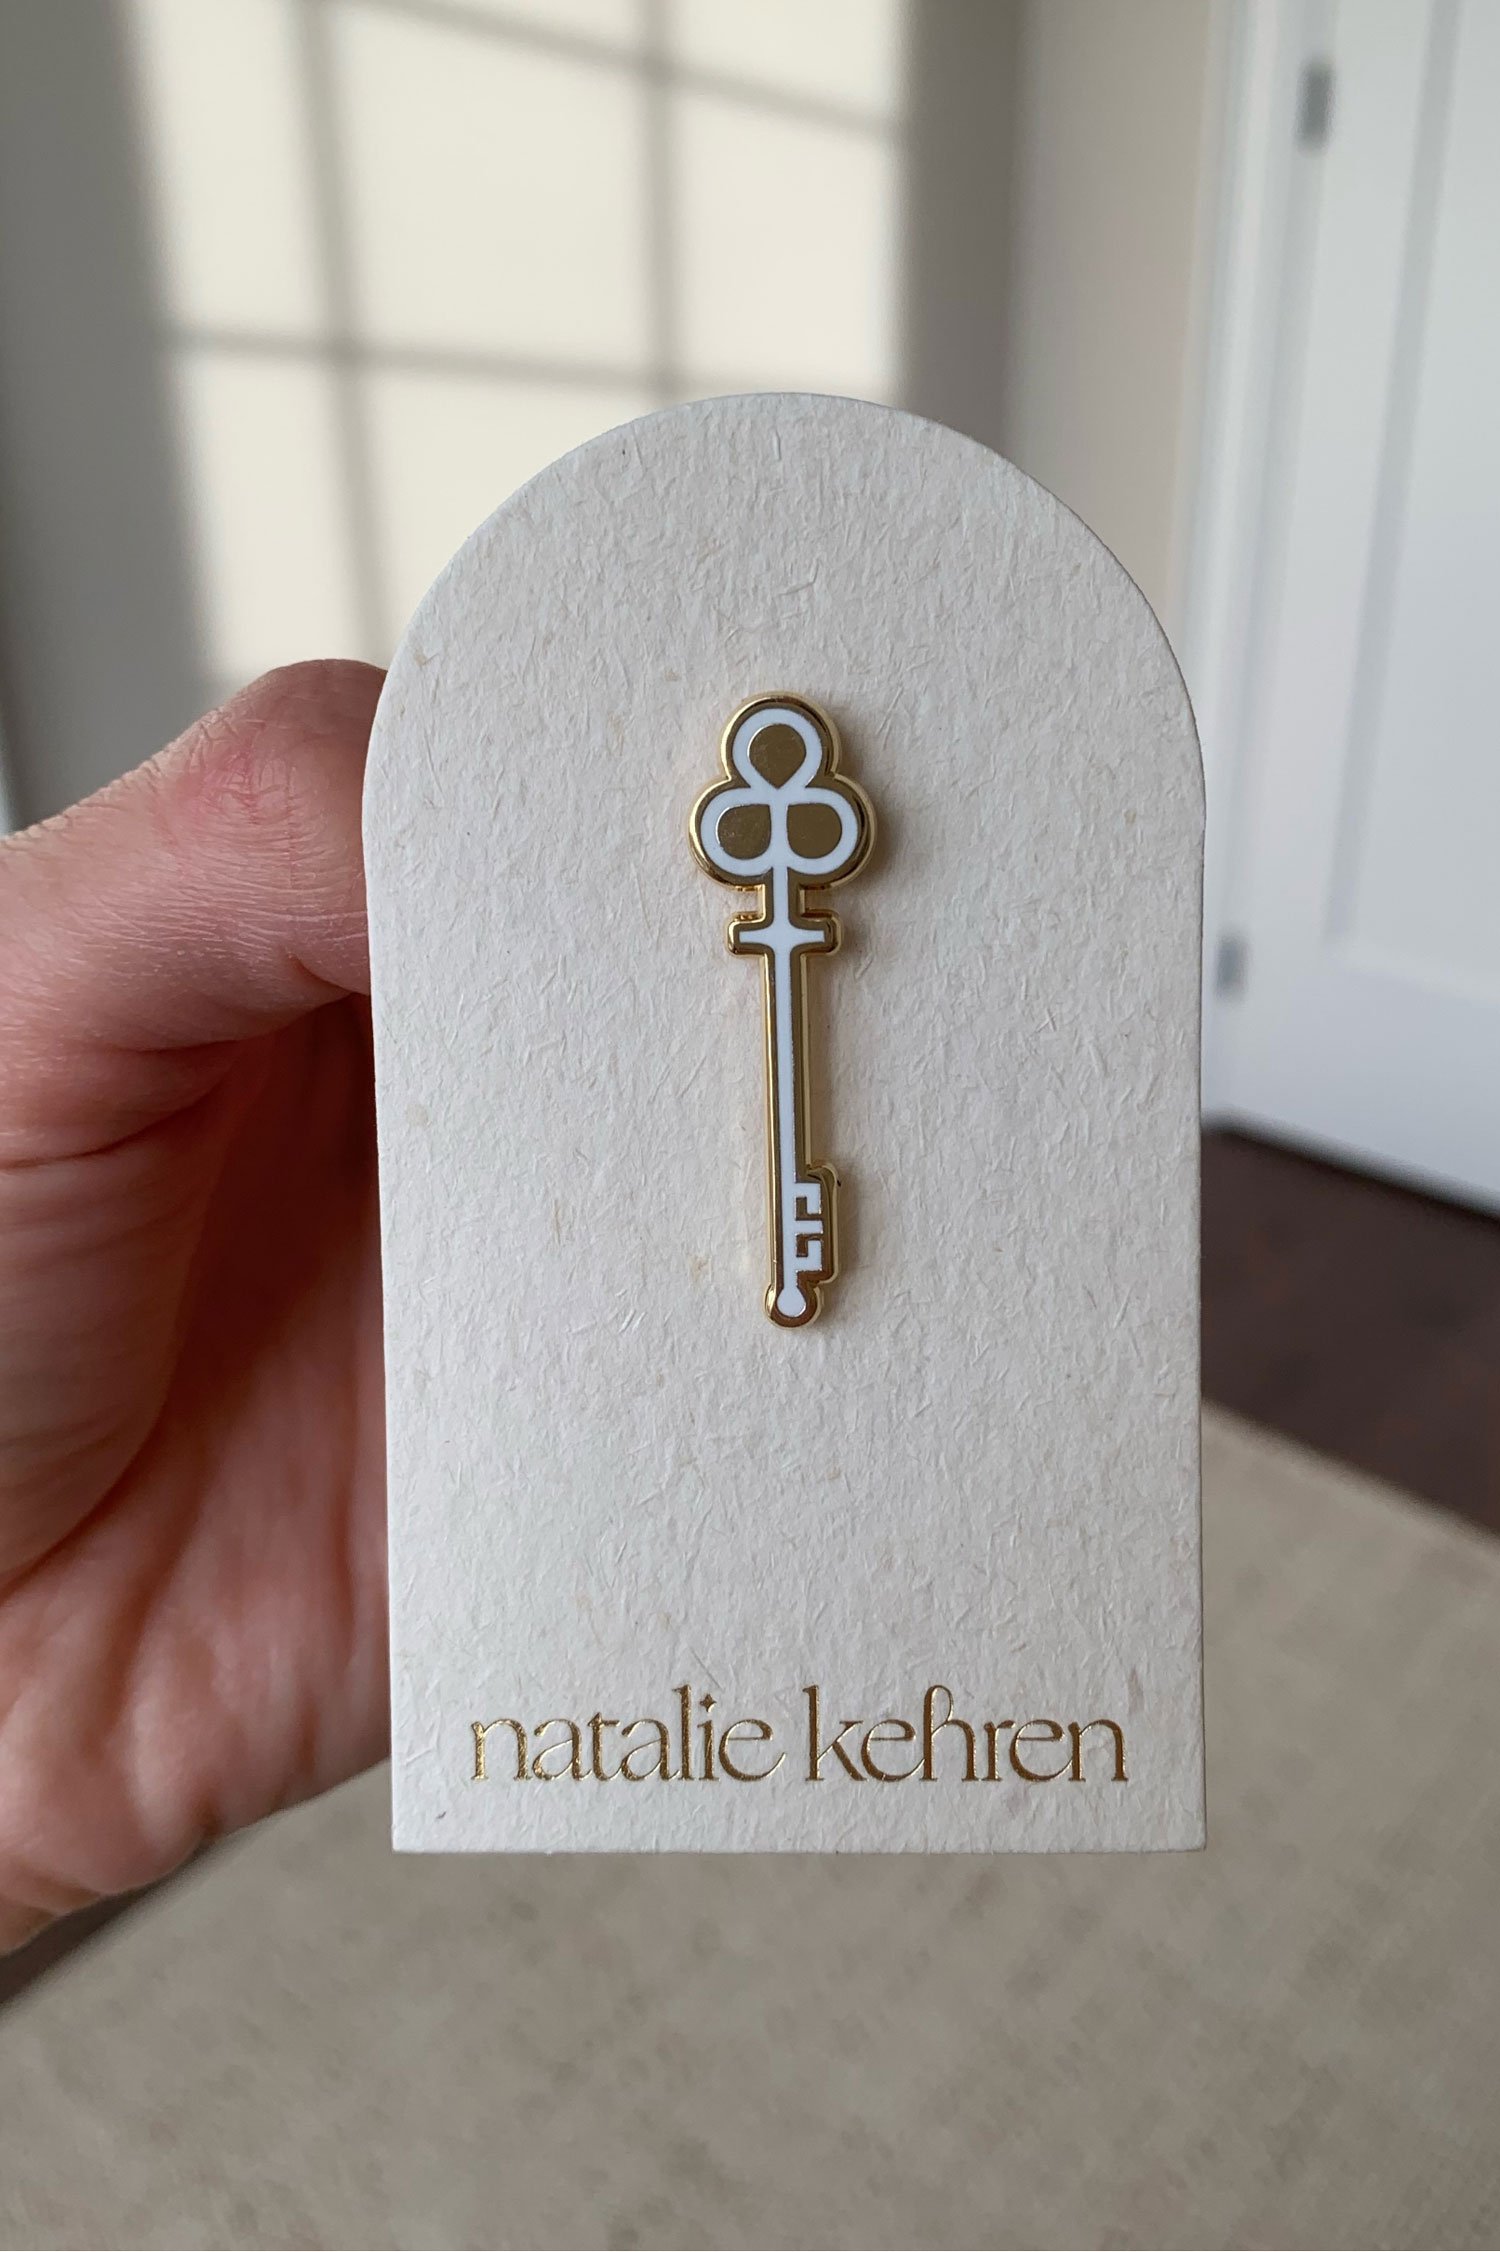 Gold enamel pin in the shape of a skeleton key afixed to an arc-shaped business card with gold foil details.